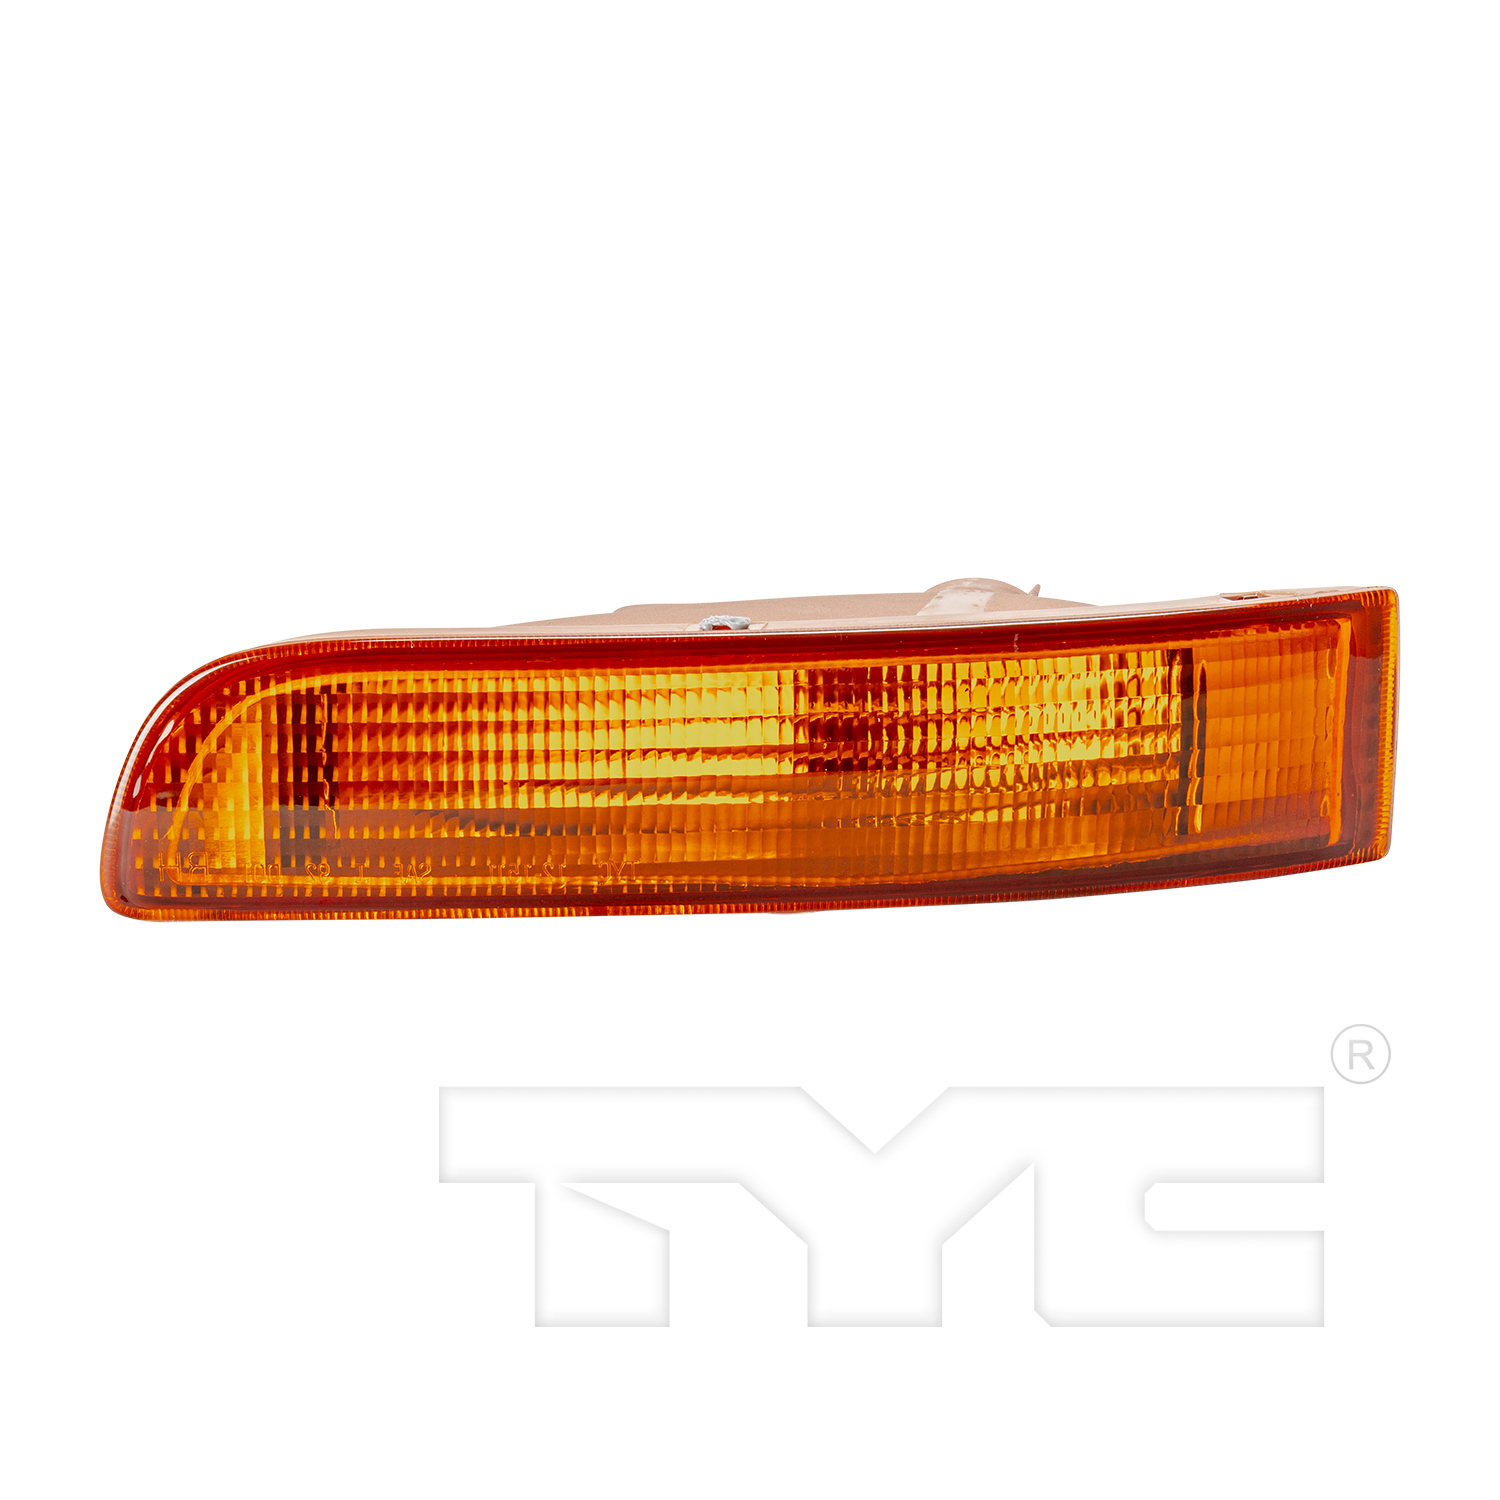 Aftermarket LAMPS for NISSAN - MAXIMA, MAXIMA,95-95,LT Front signal lamp